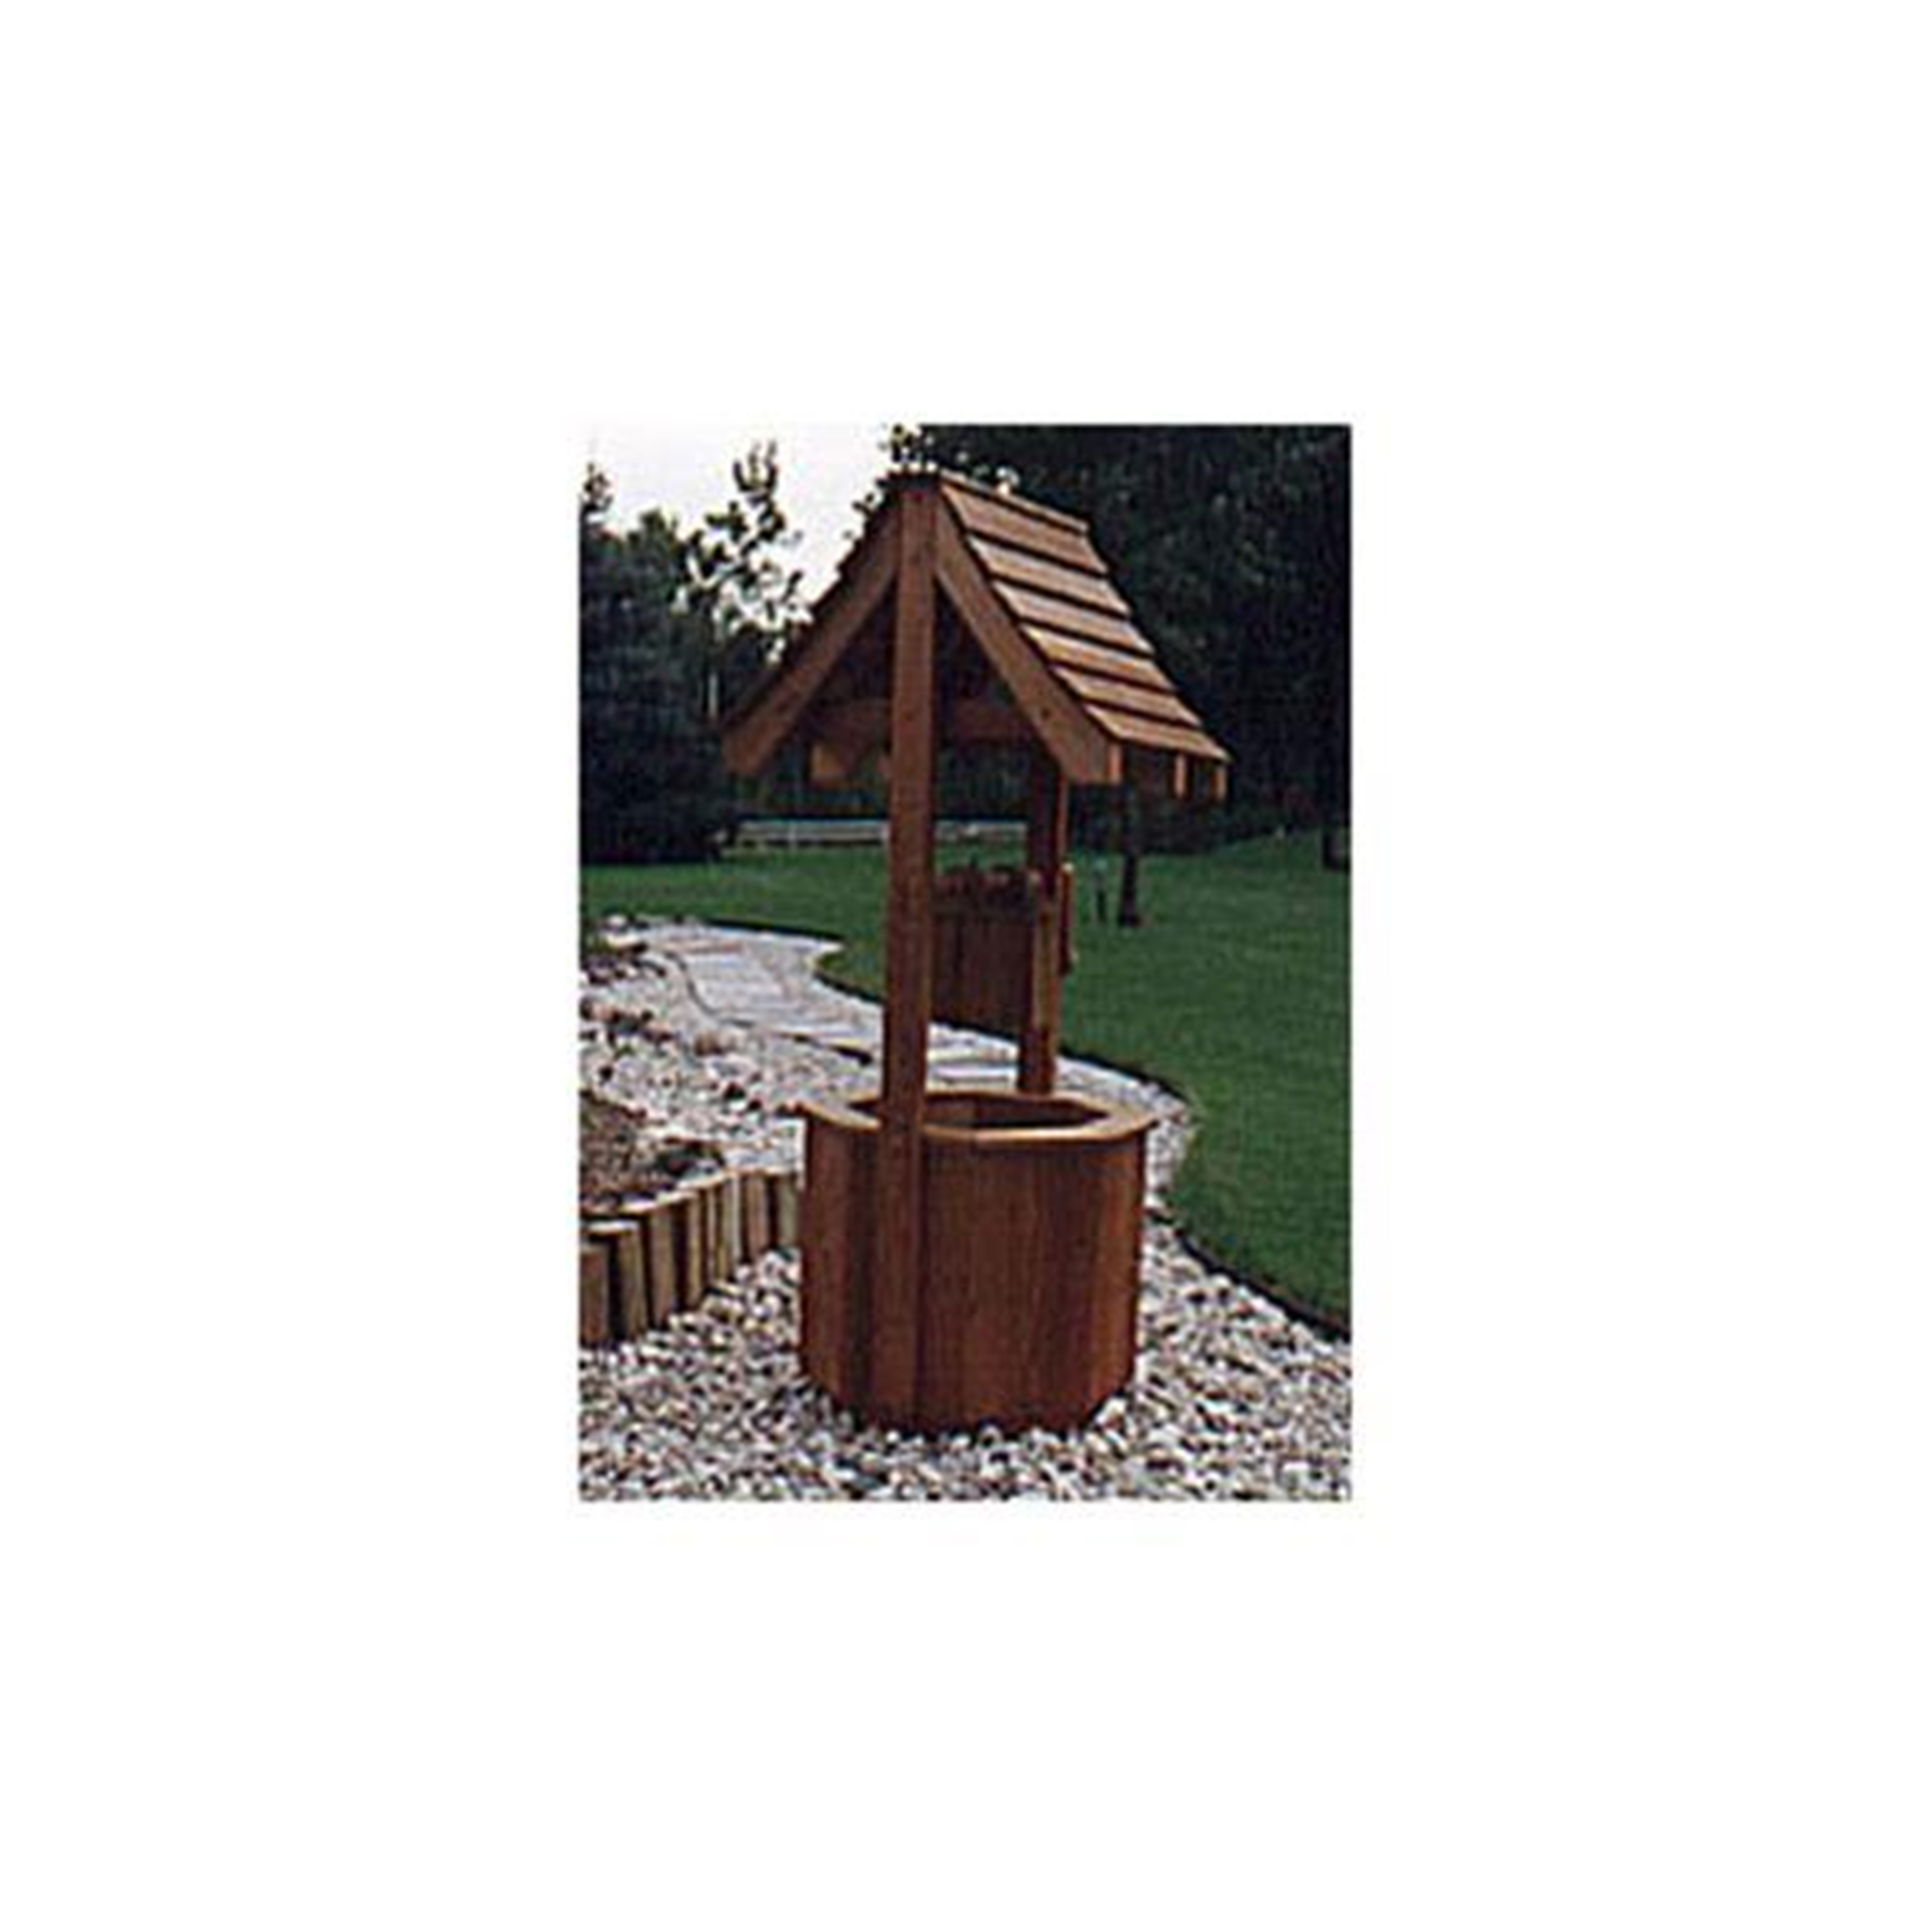 Woodworking Project Paper Plan To Build Garden Wishing Well